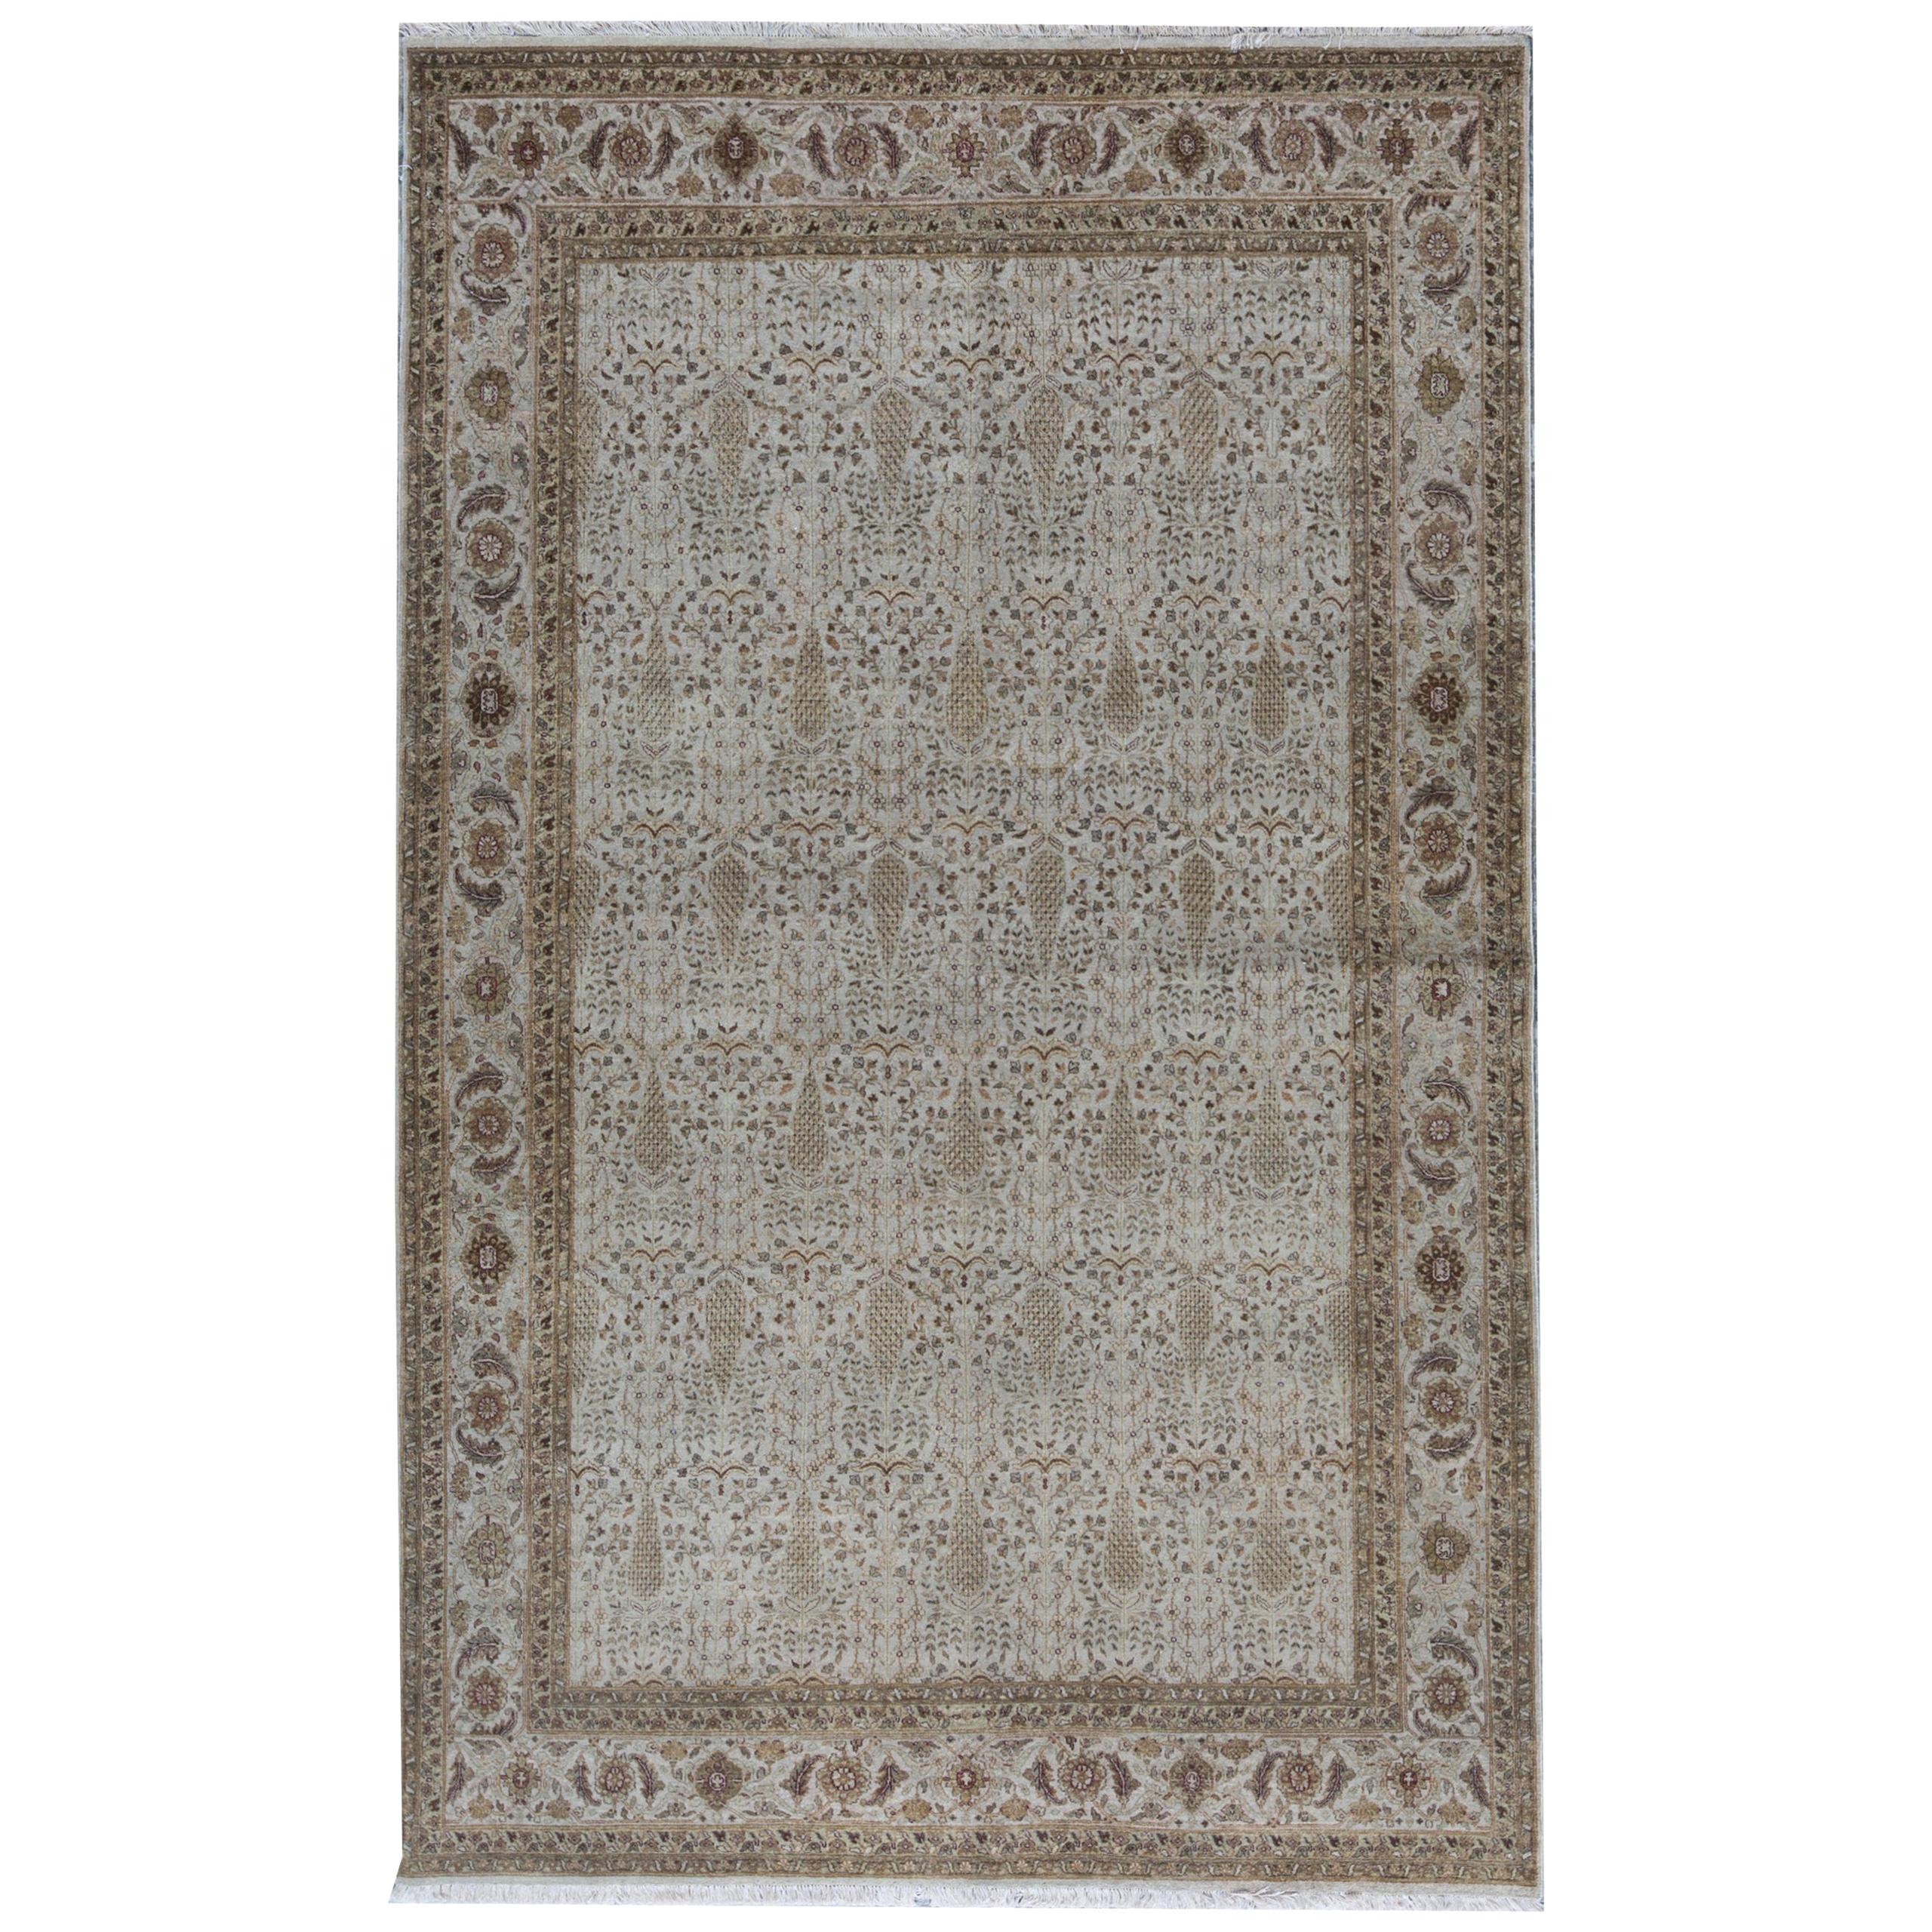 One-of-a-Kind Traditional Handwoven  Wool Area Rug 6'2 x 9'2 For Sale